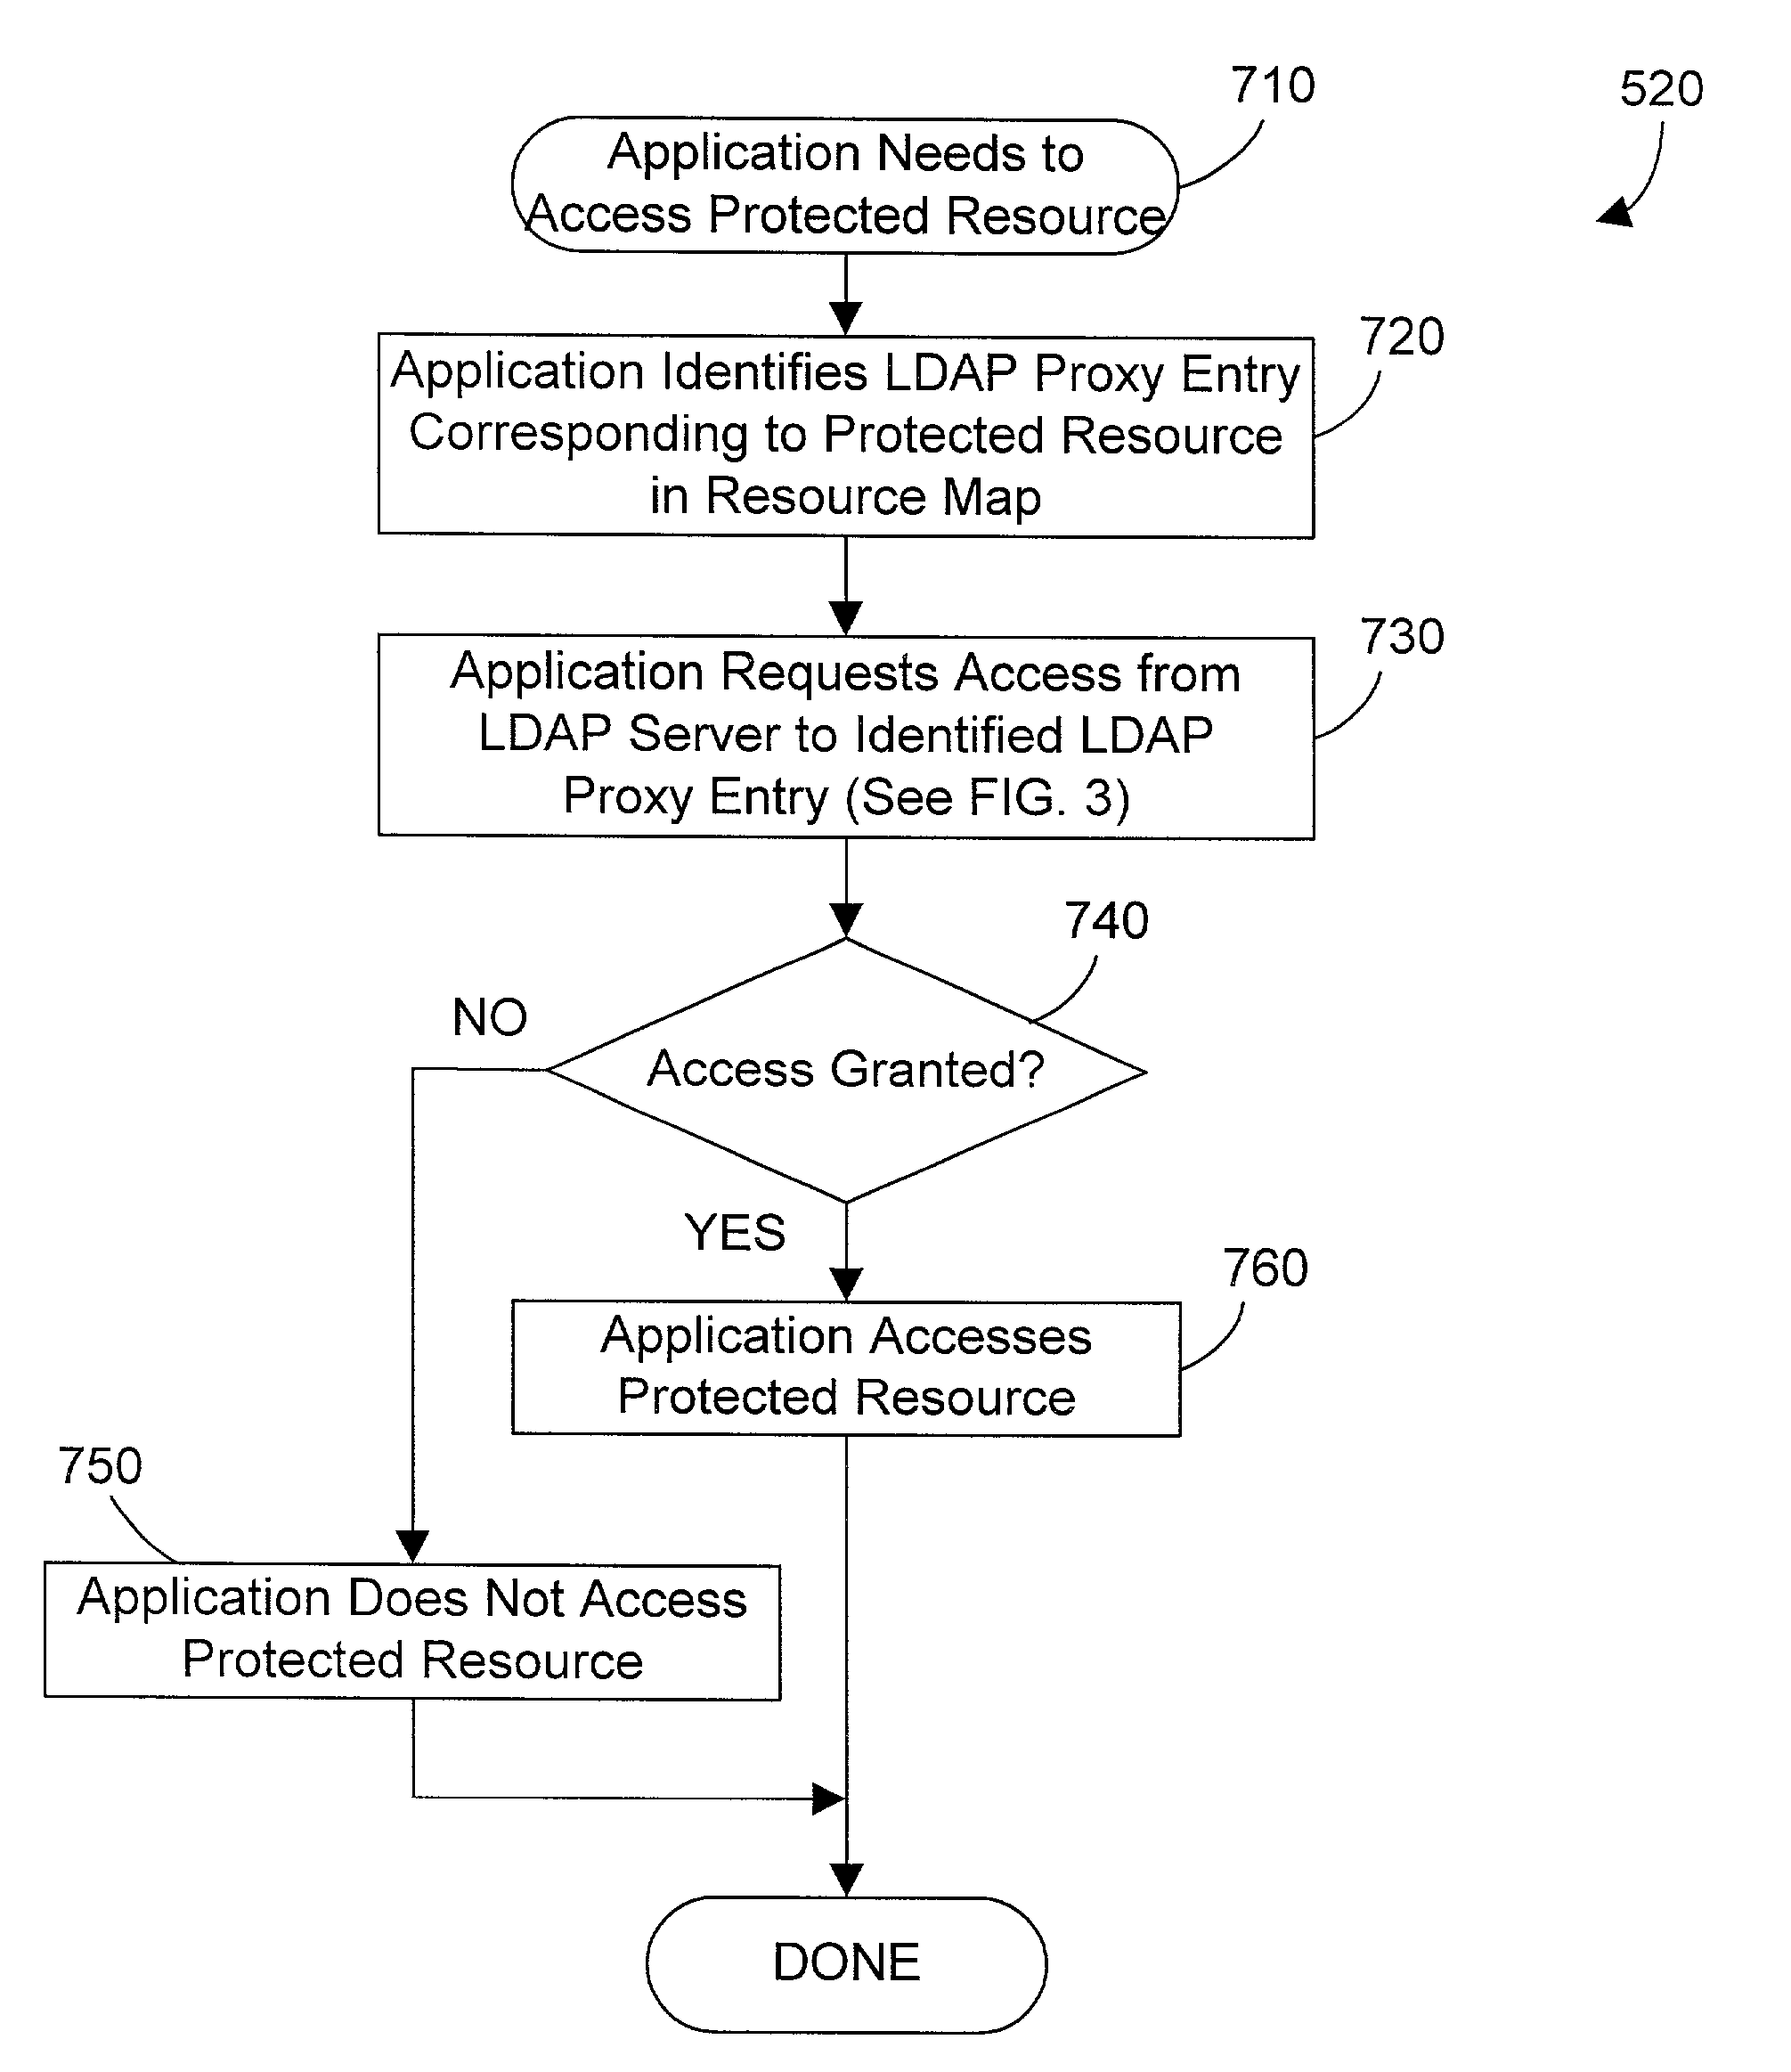 Apparatus and method for using a directory service for authentication and authorization to access resources outside of the directory service